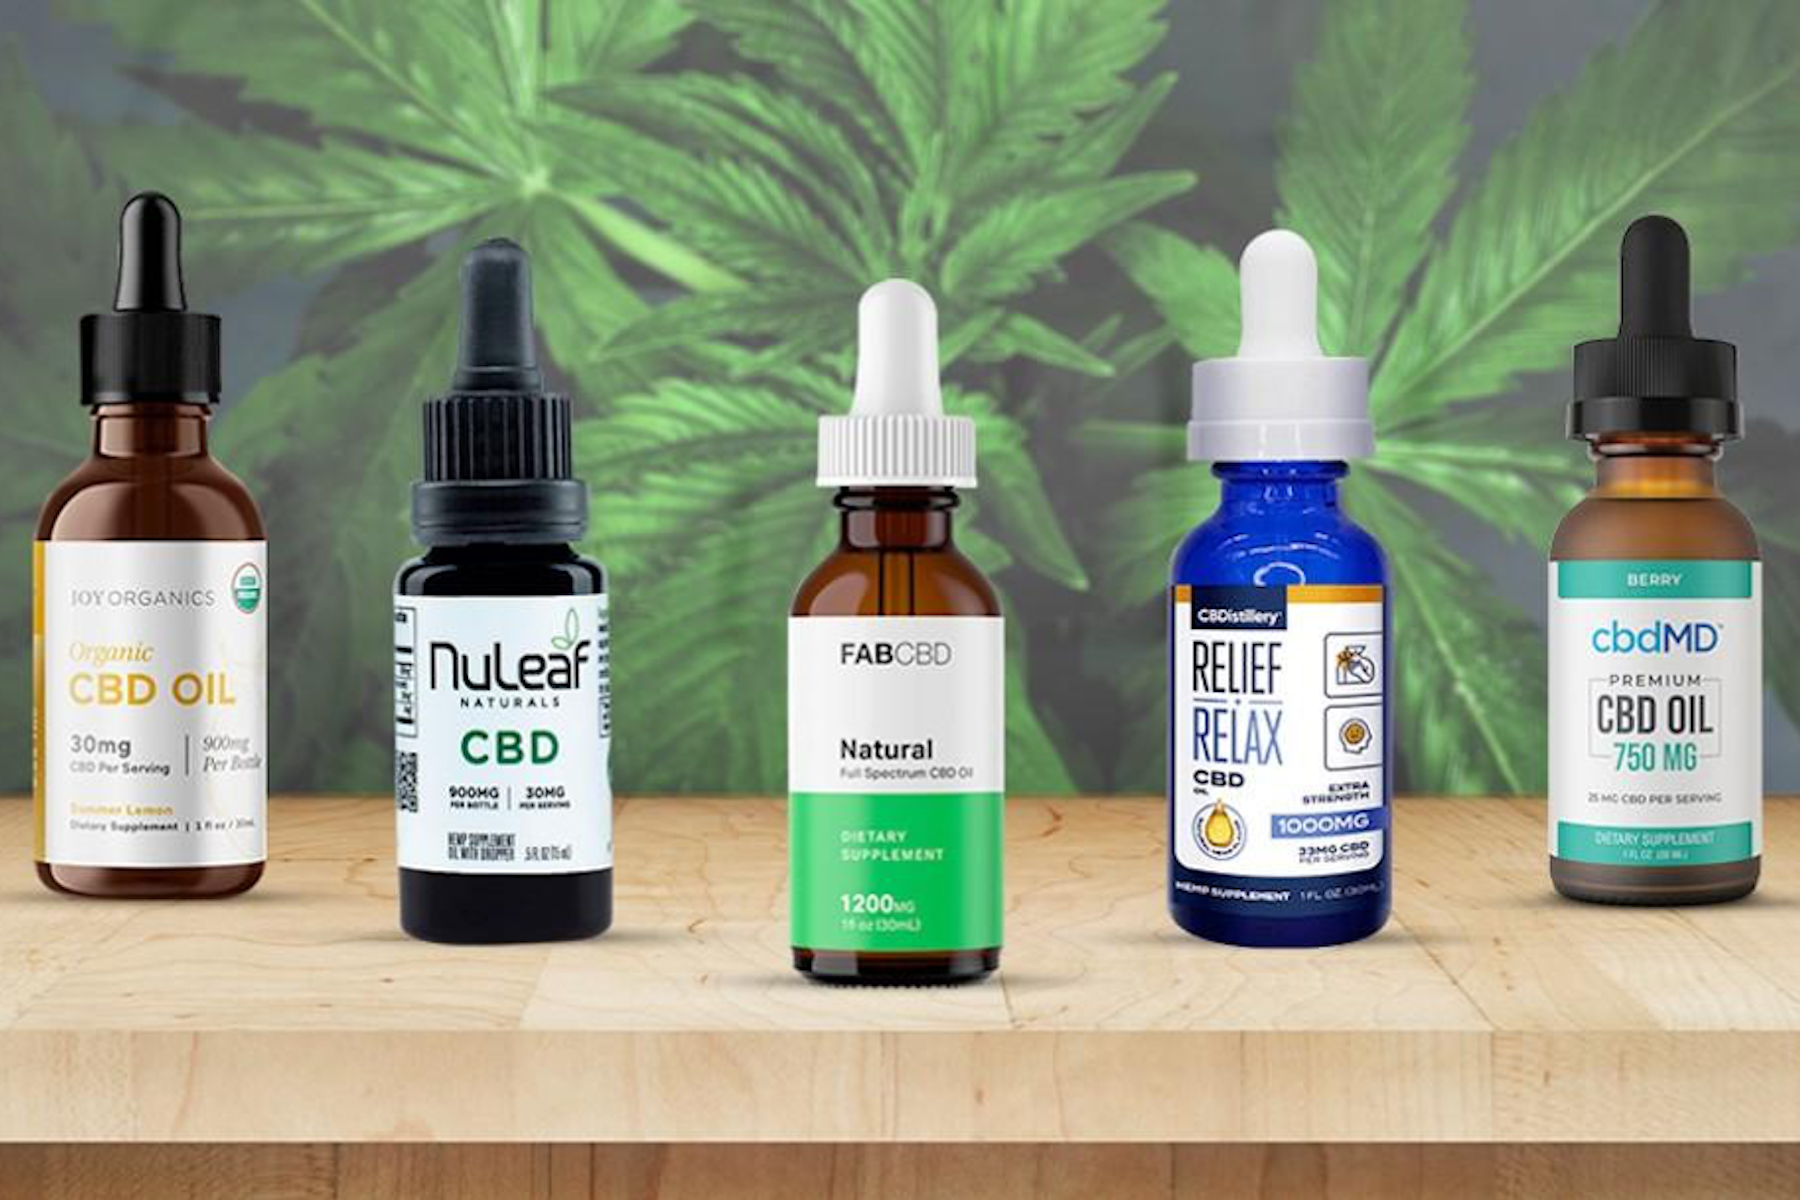 The Best CBD Oil for Anxiety 2022